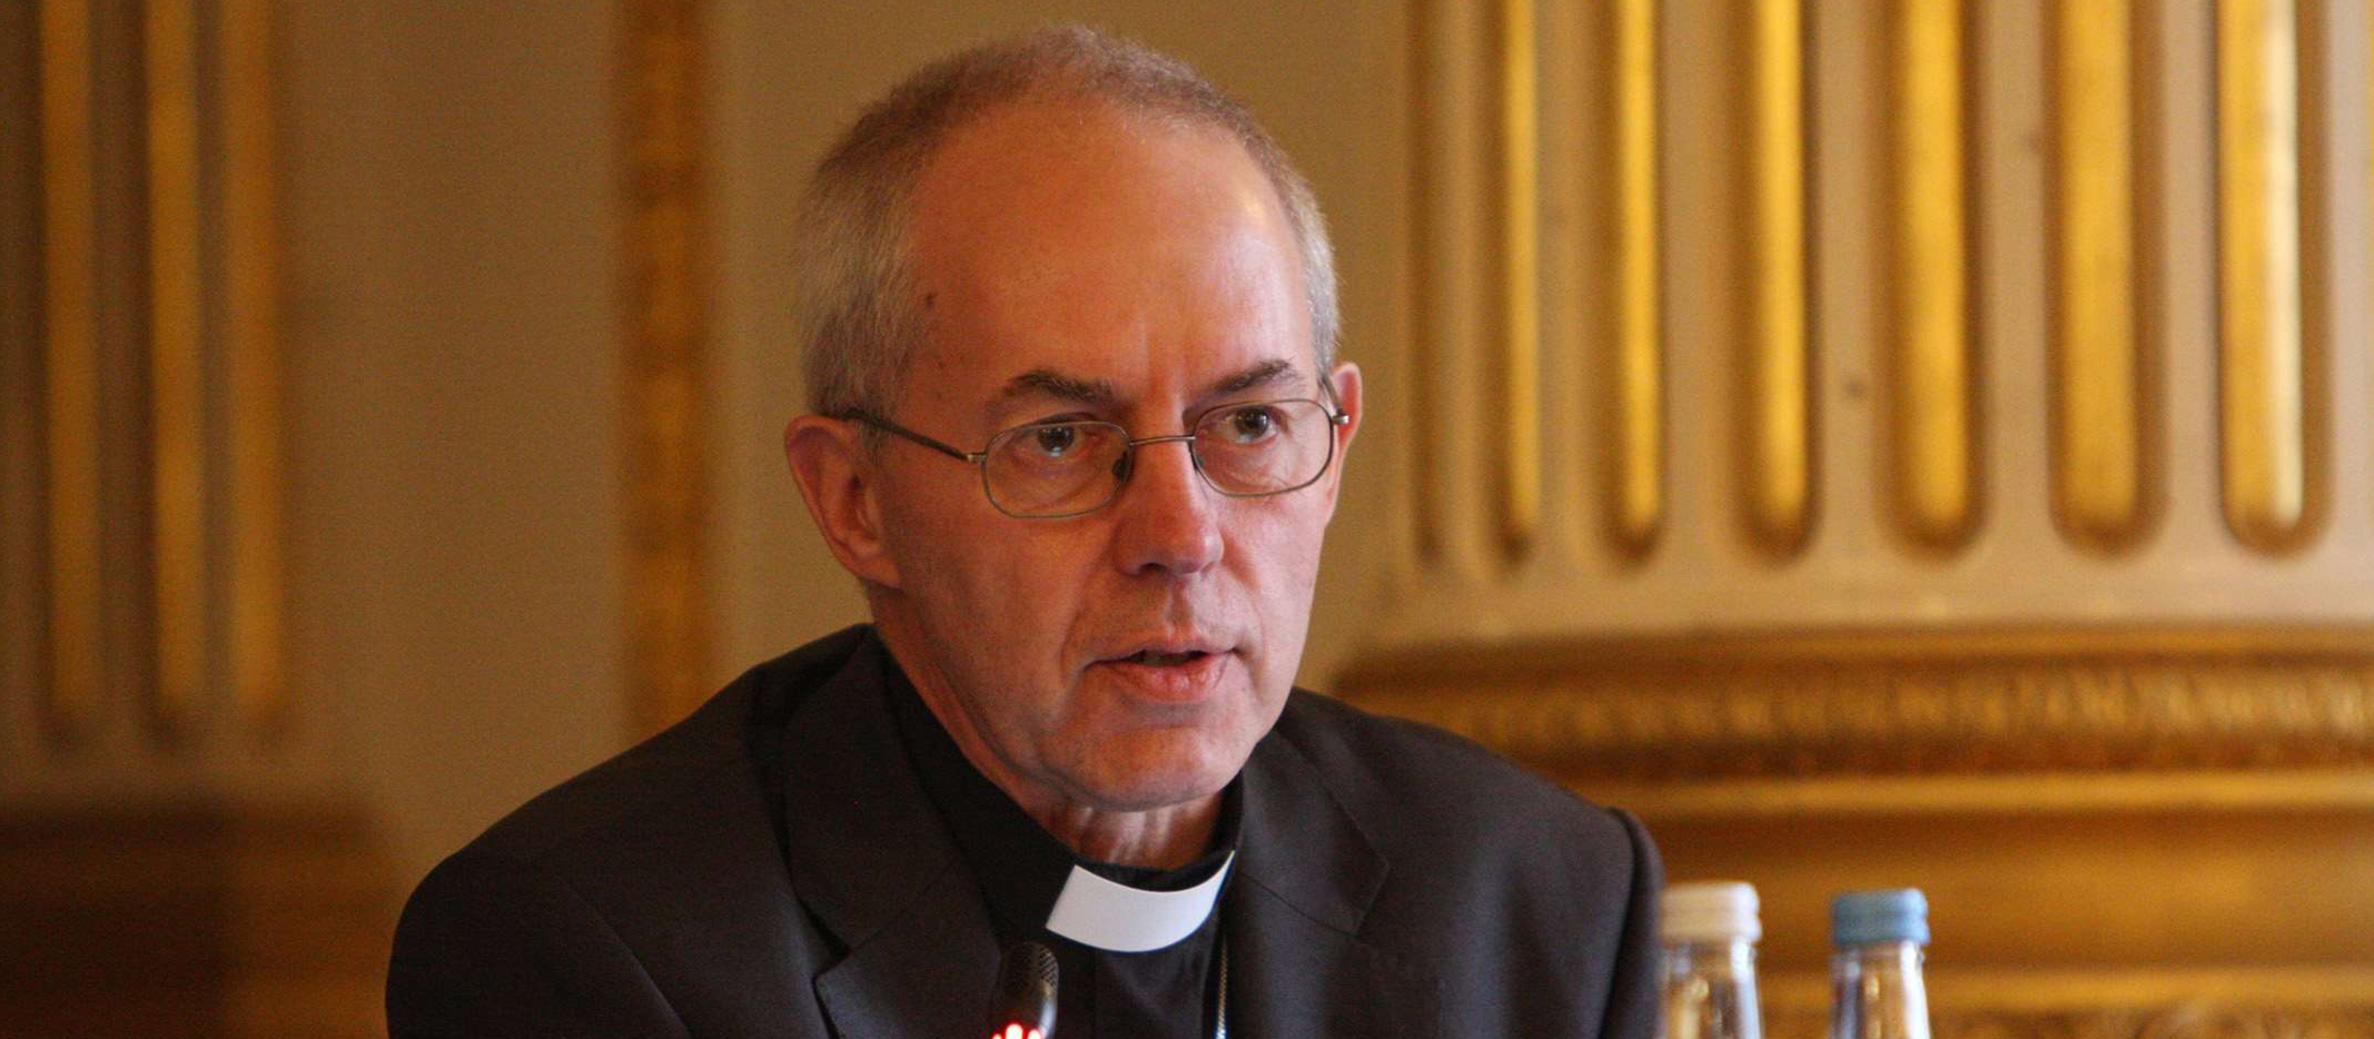 Archbishop Welby: Church should repent over anti-Semitism